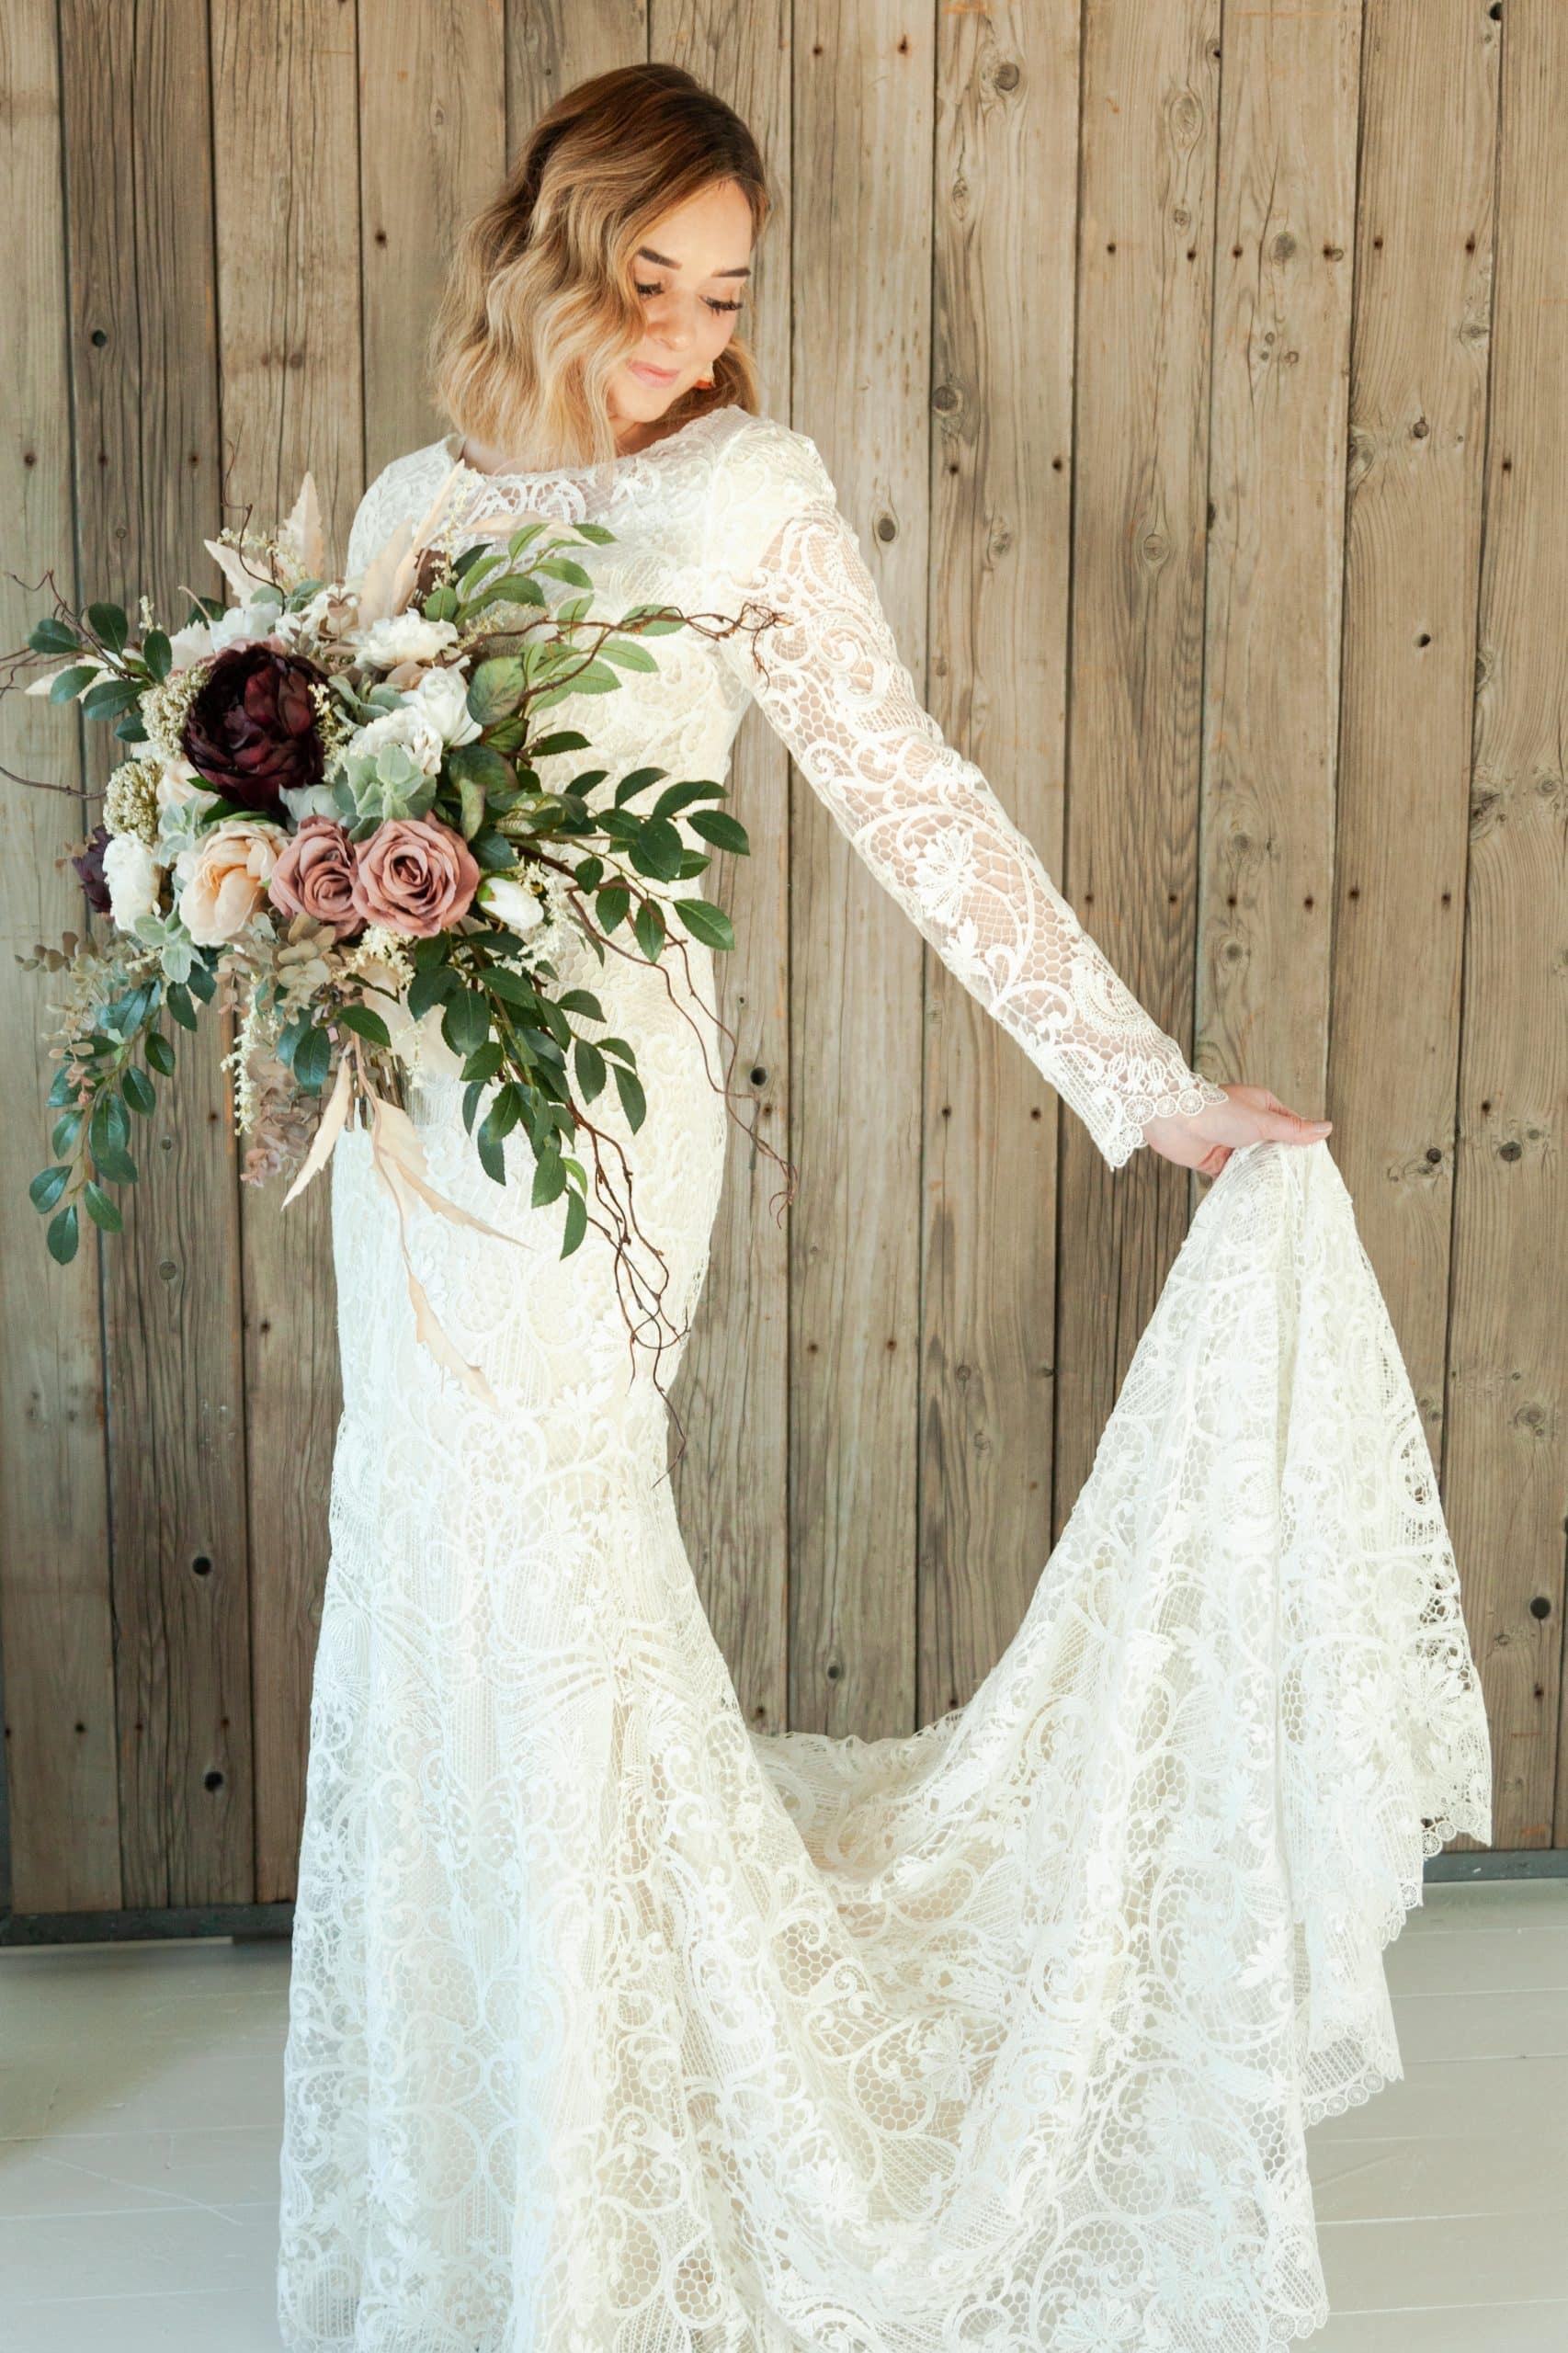 A bridge wearing a modest bridal gown while holding a bouquet of flowers